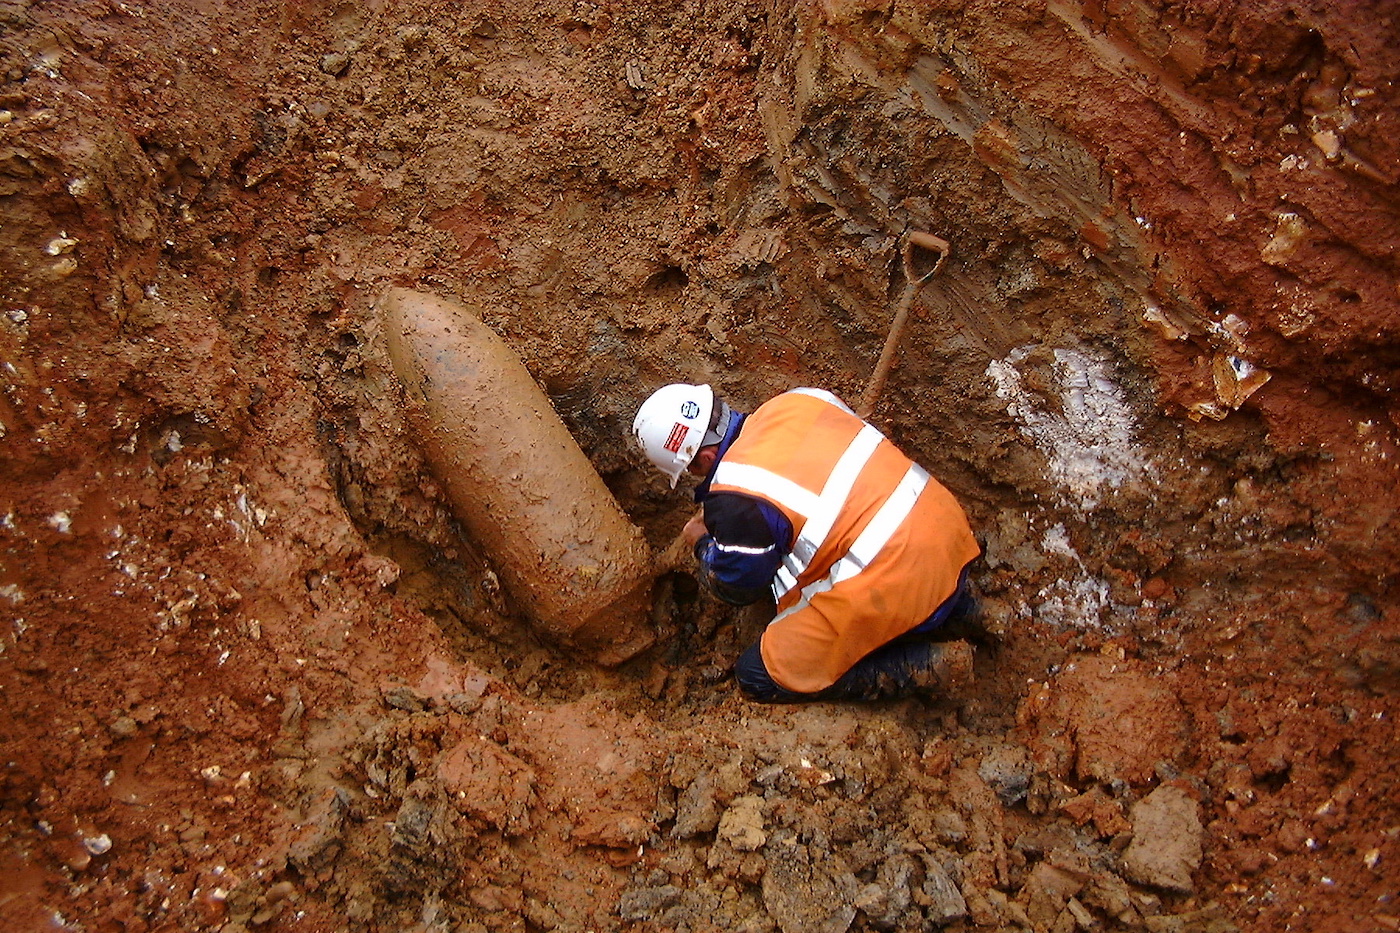 What’s the value of UXO risk mitigation services?